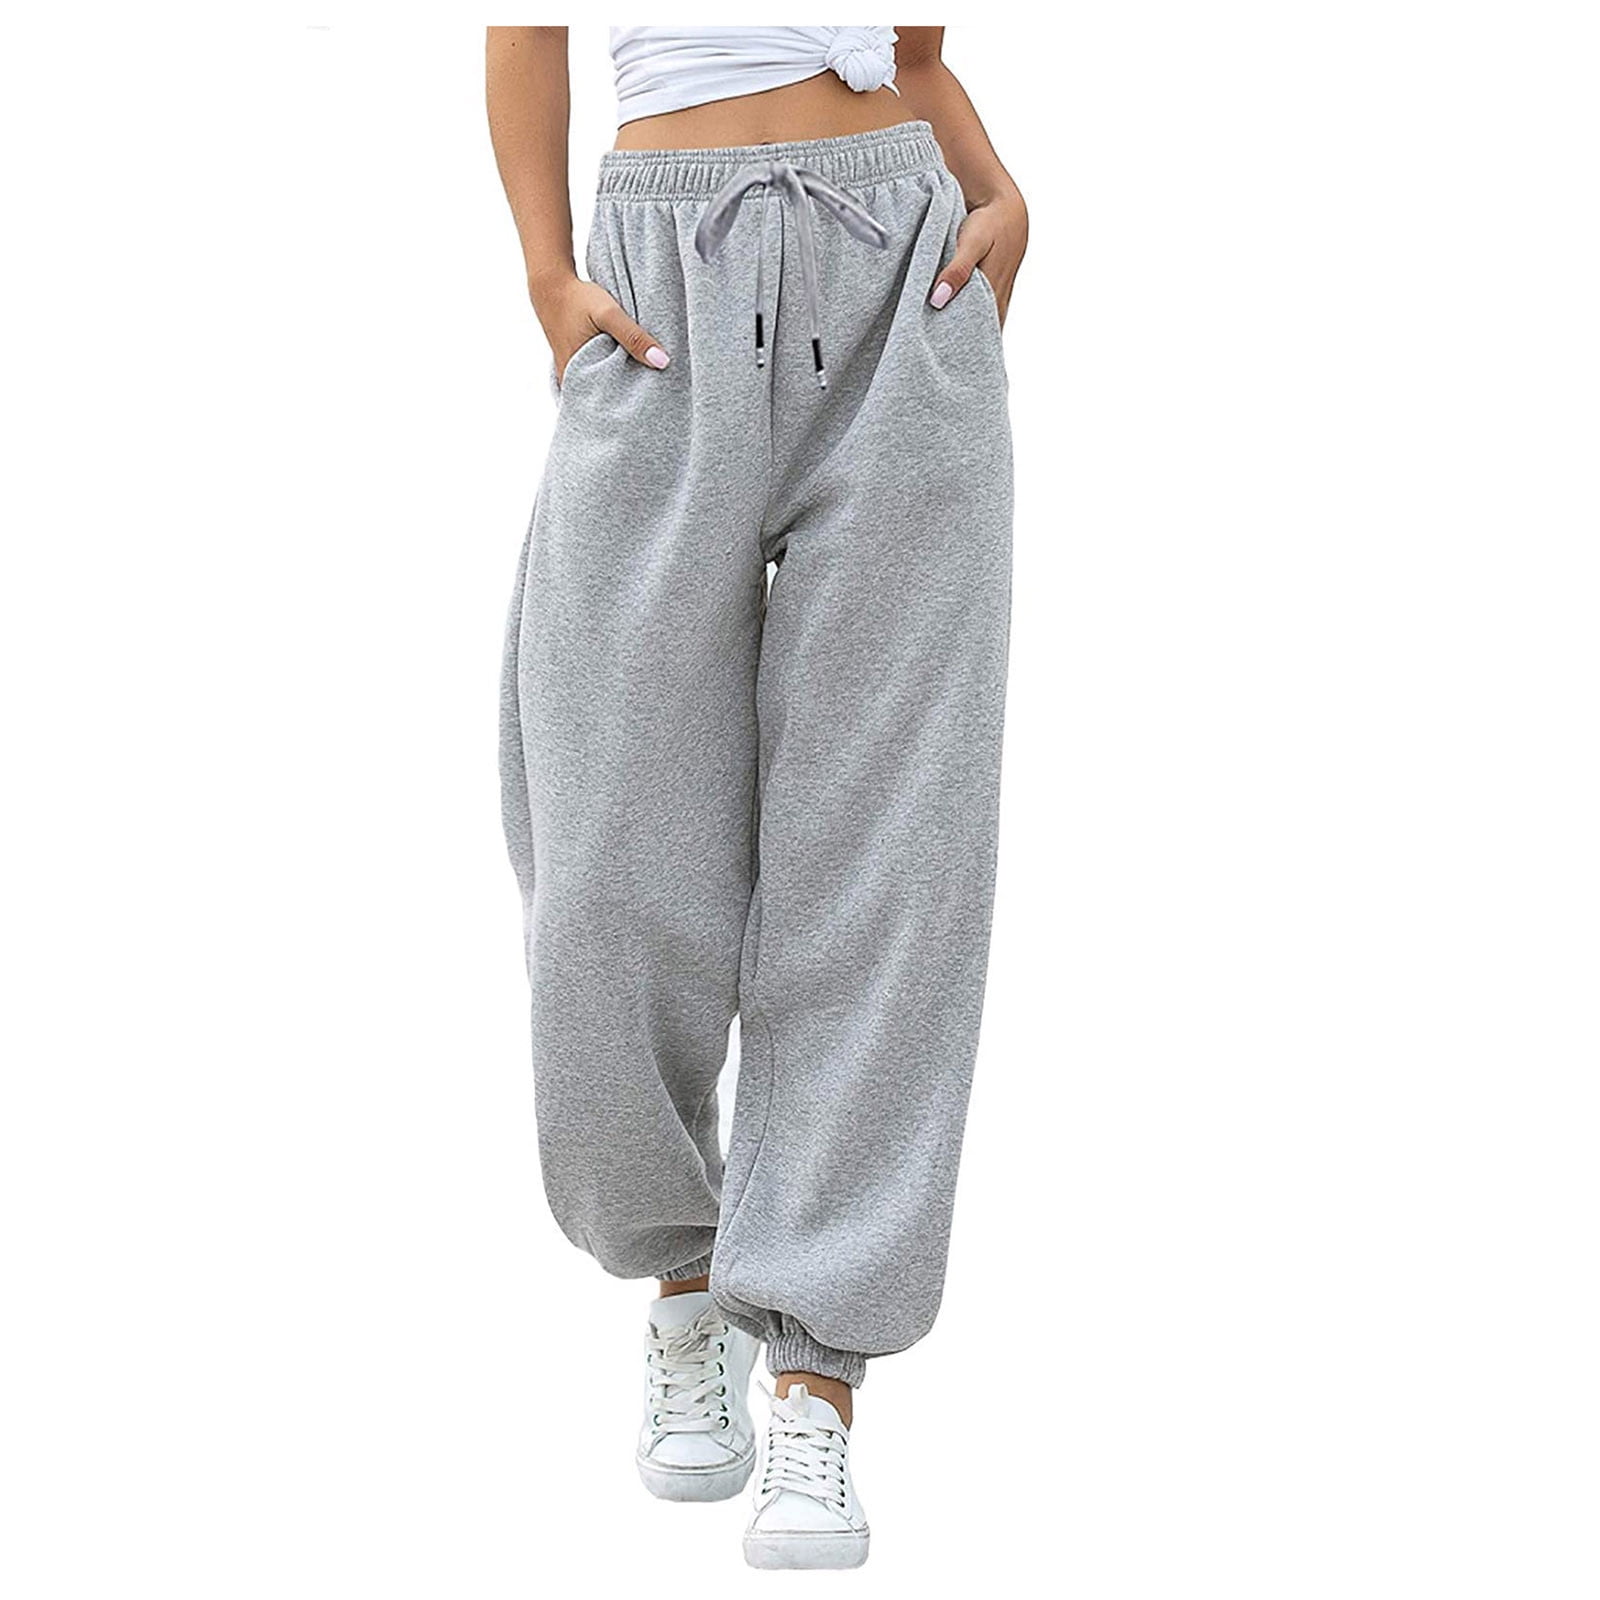 JGTDBPO Baggy Sweatpants For Women Casual High Waist Jogger Pants Y2K  Trendy Lounge Trousers With Pockets Sporty Gym Athletic Fit Jogger Pants 